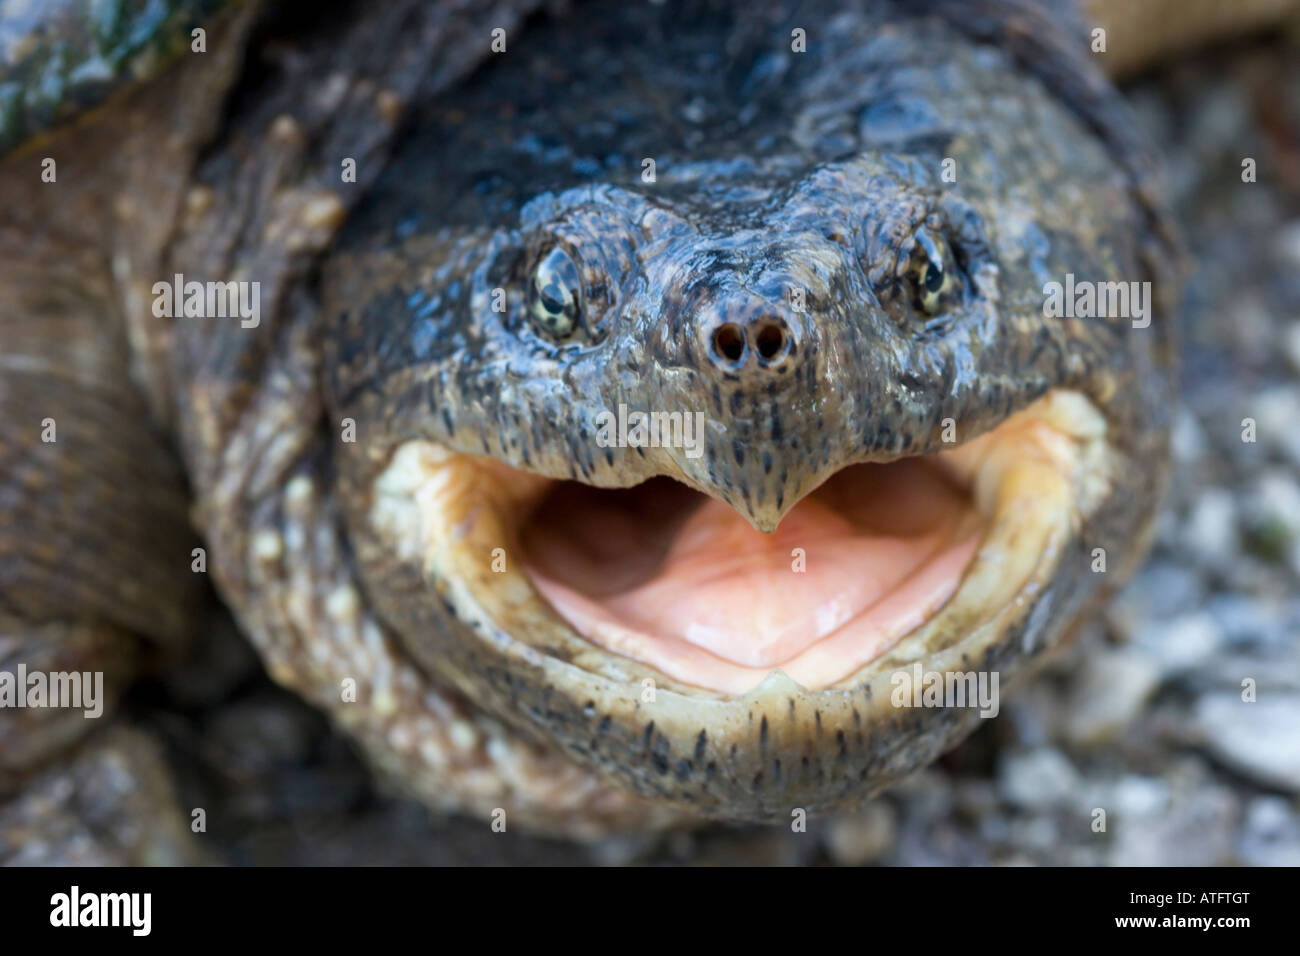 snapping turtle Stock Photo